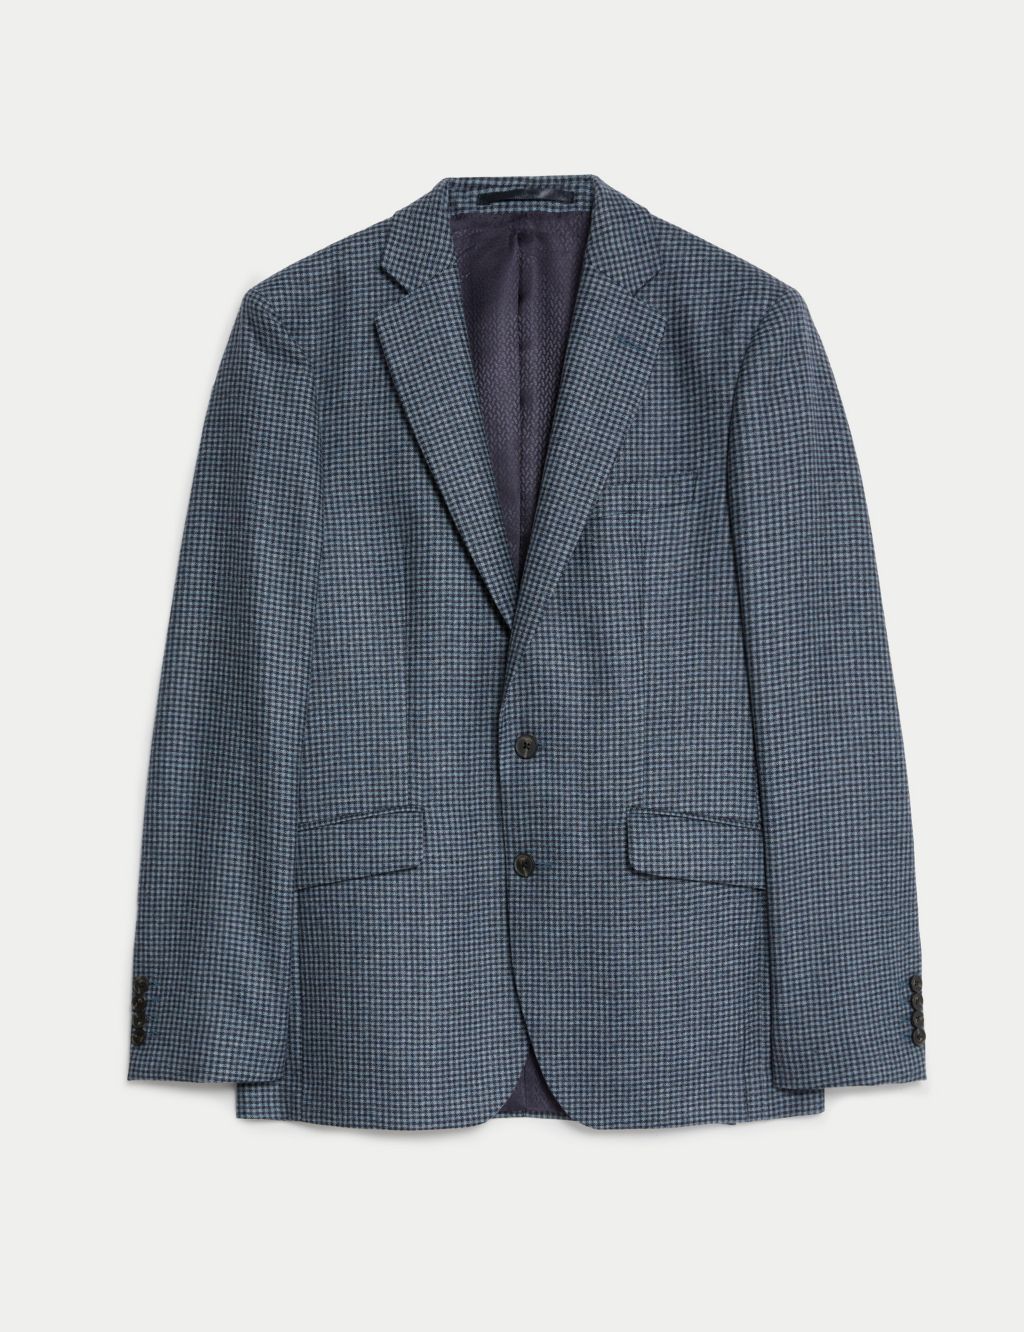 Tailored Fit Wool Rich Check Jacket image 1